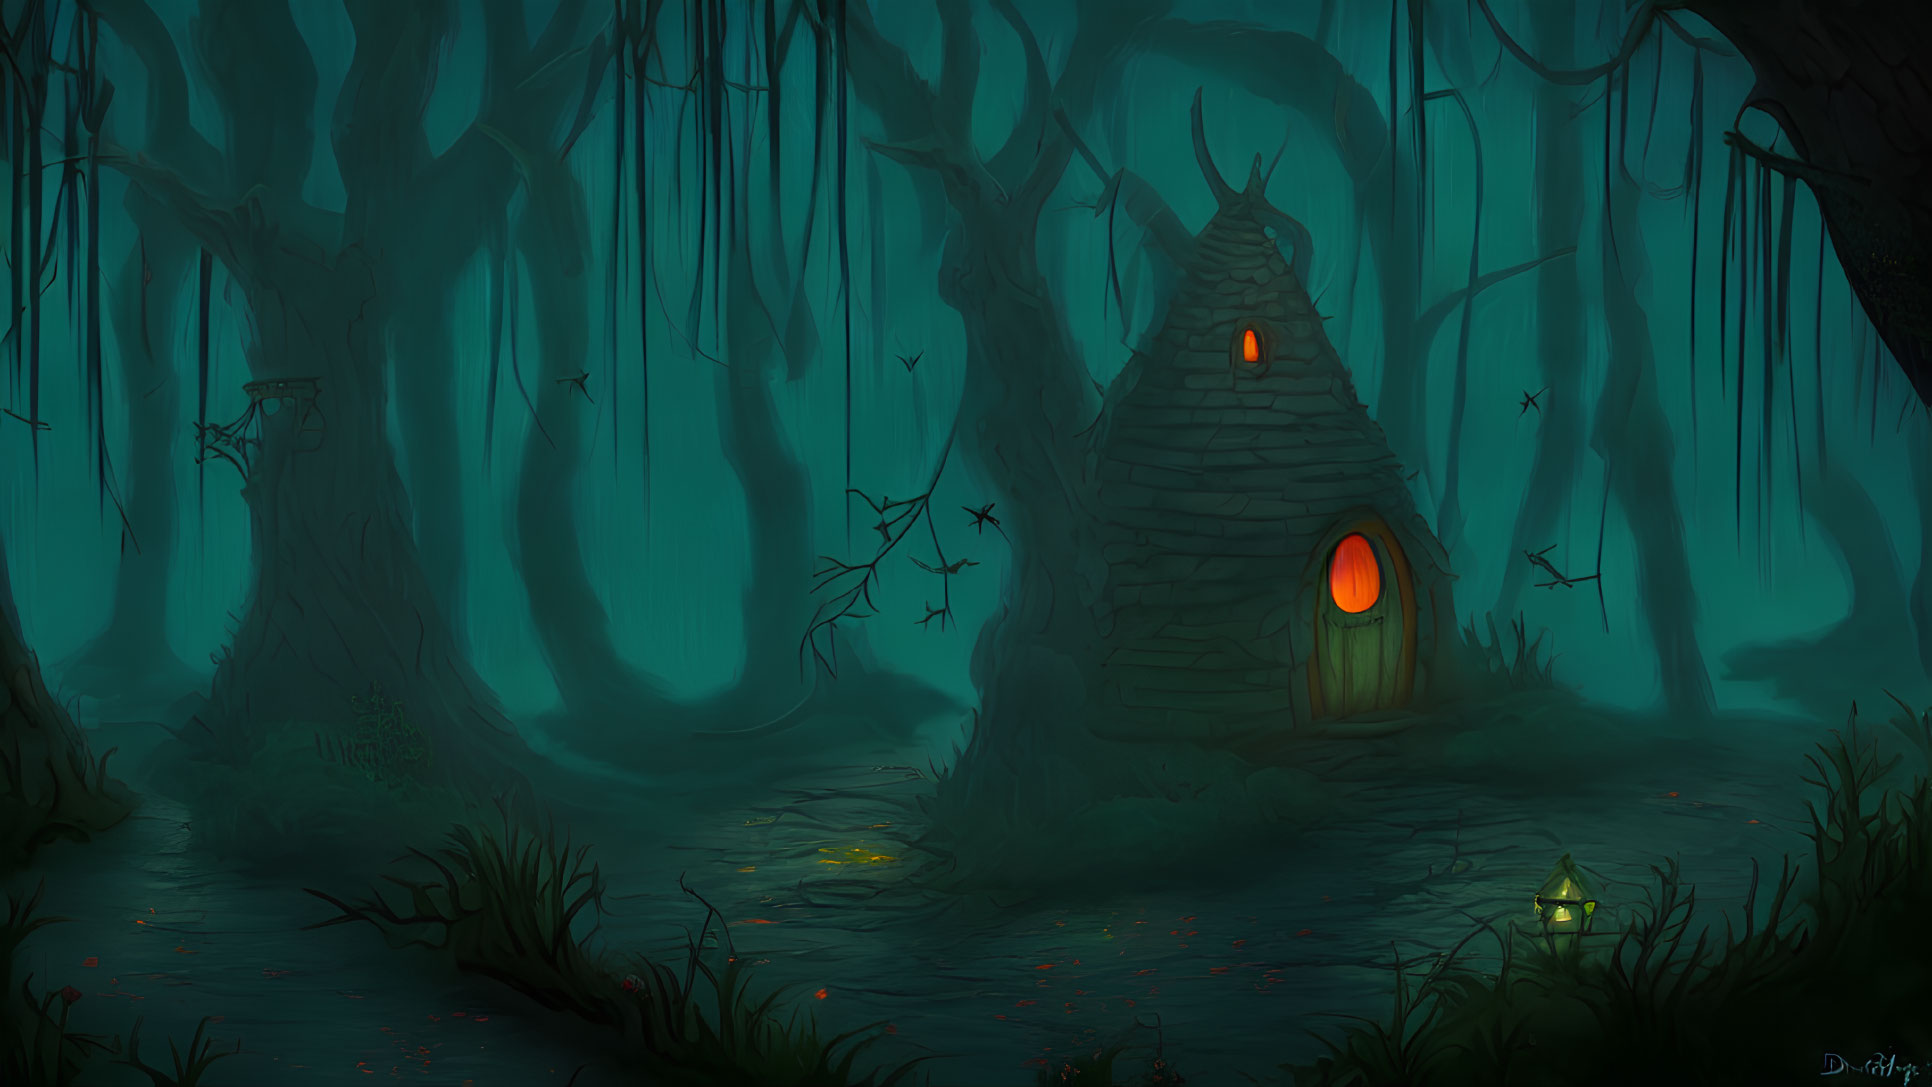 Dimly Lit Swamp with Crooked Hut, Glowing Windows, Eerie Trees